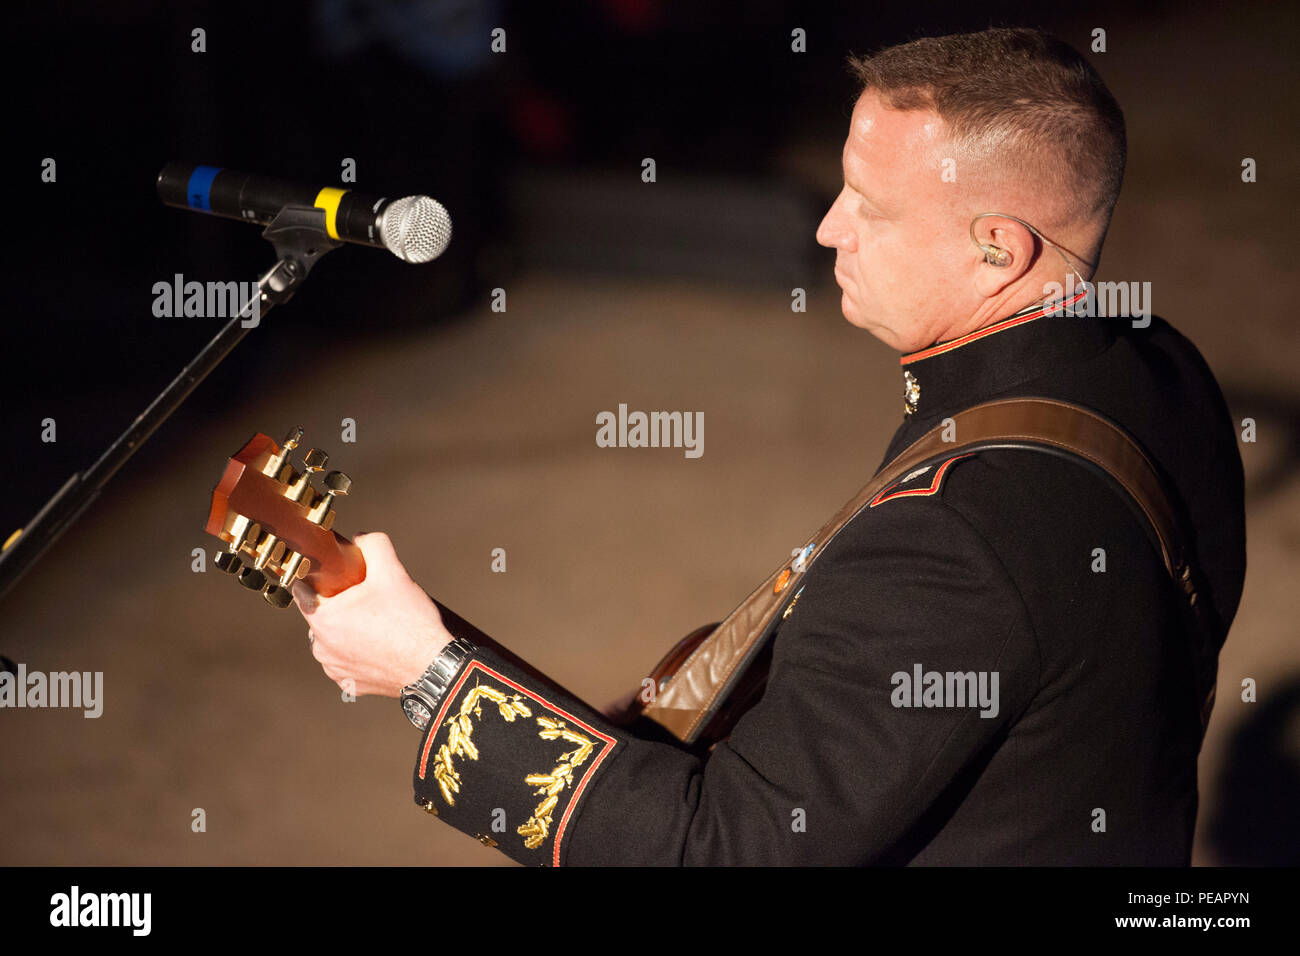 U.S. Marine Lt. Col. Michael Corrado, Deputy Assistant Chief of Staff G-3, 4th Marine Division, Marine Forces Reserve, performs his song “Stand” during the celebration of the 240th Marine Corps Birthday Ball at Mardi Gras World, New Orleans, La., Nov. 21, 2015. This year’s celebration honors those past, present, and future Marines throughout history and marks the 240th Marine Corps Birthday since its founding on Nov. 10, 1775. (U.S. Marine Corps photo by Kimberly Aguirre/Released) Stock Photo